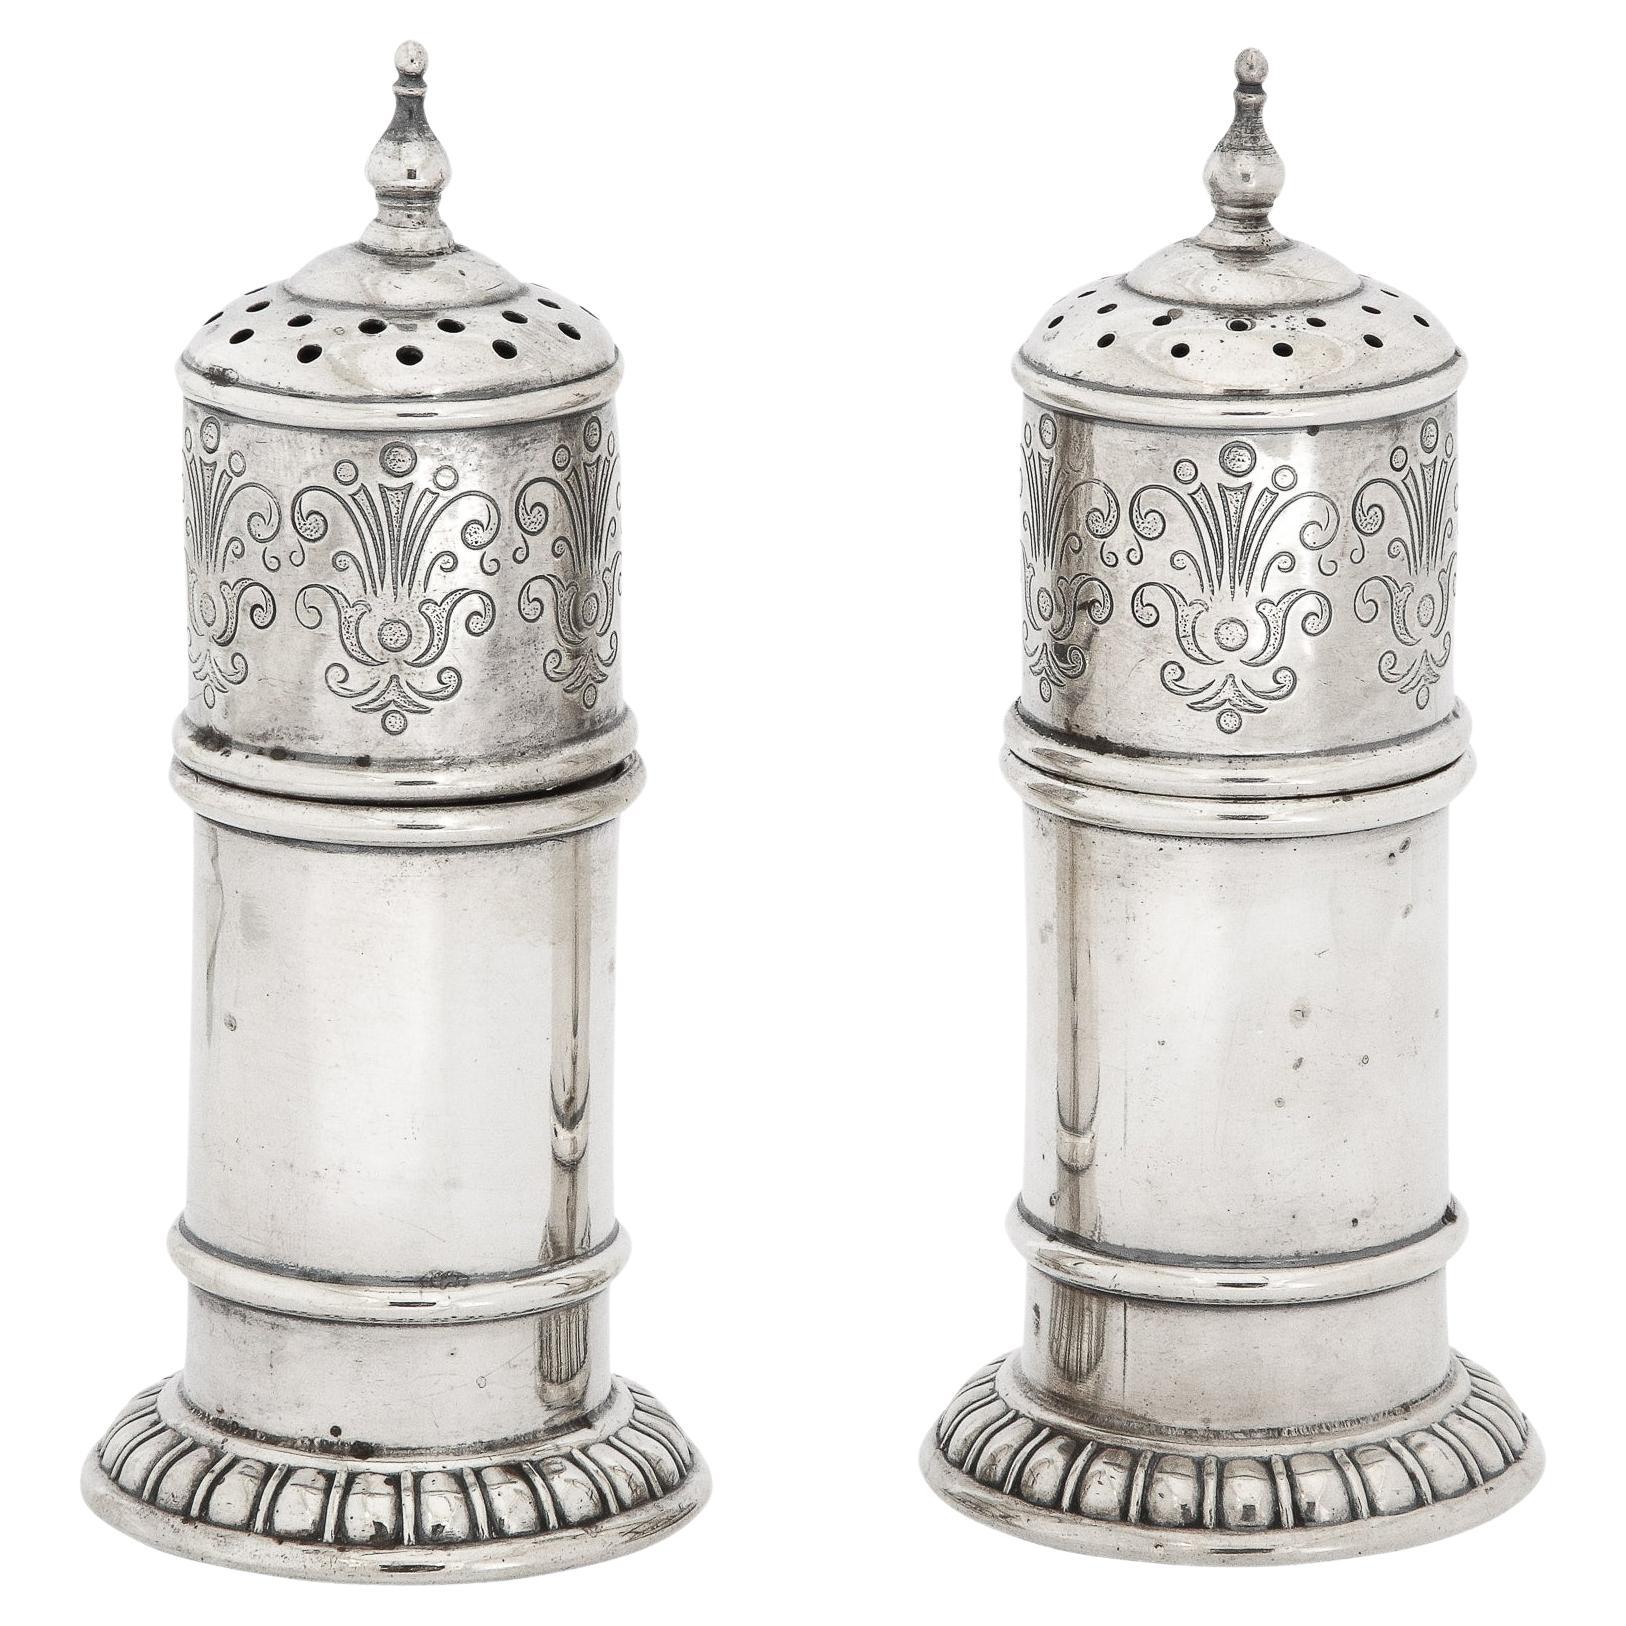 https://a.1stdibscdn.com/pair-of-art-deco-sterling-salt-and-pepper-shakers-by-rogers-lunt-and-bowlen-co-for-sale/f_7934/f_362695421695327300295/f_36269542_1695327300866_bg_processed.jpg